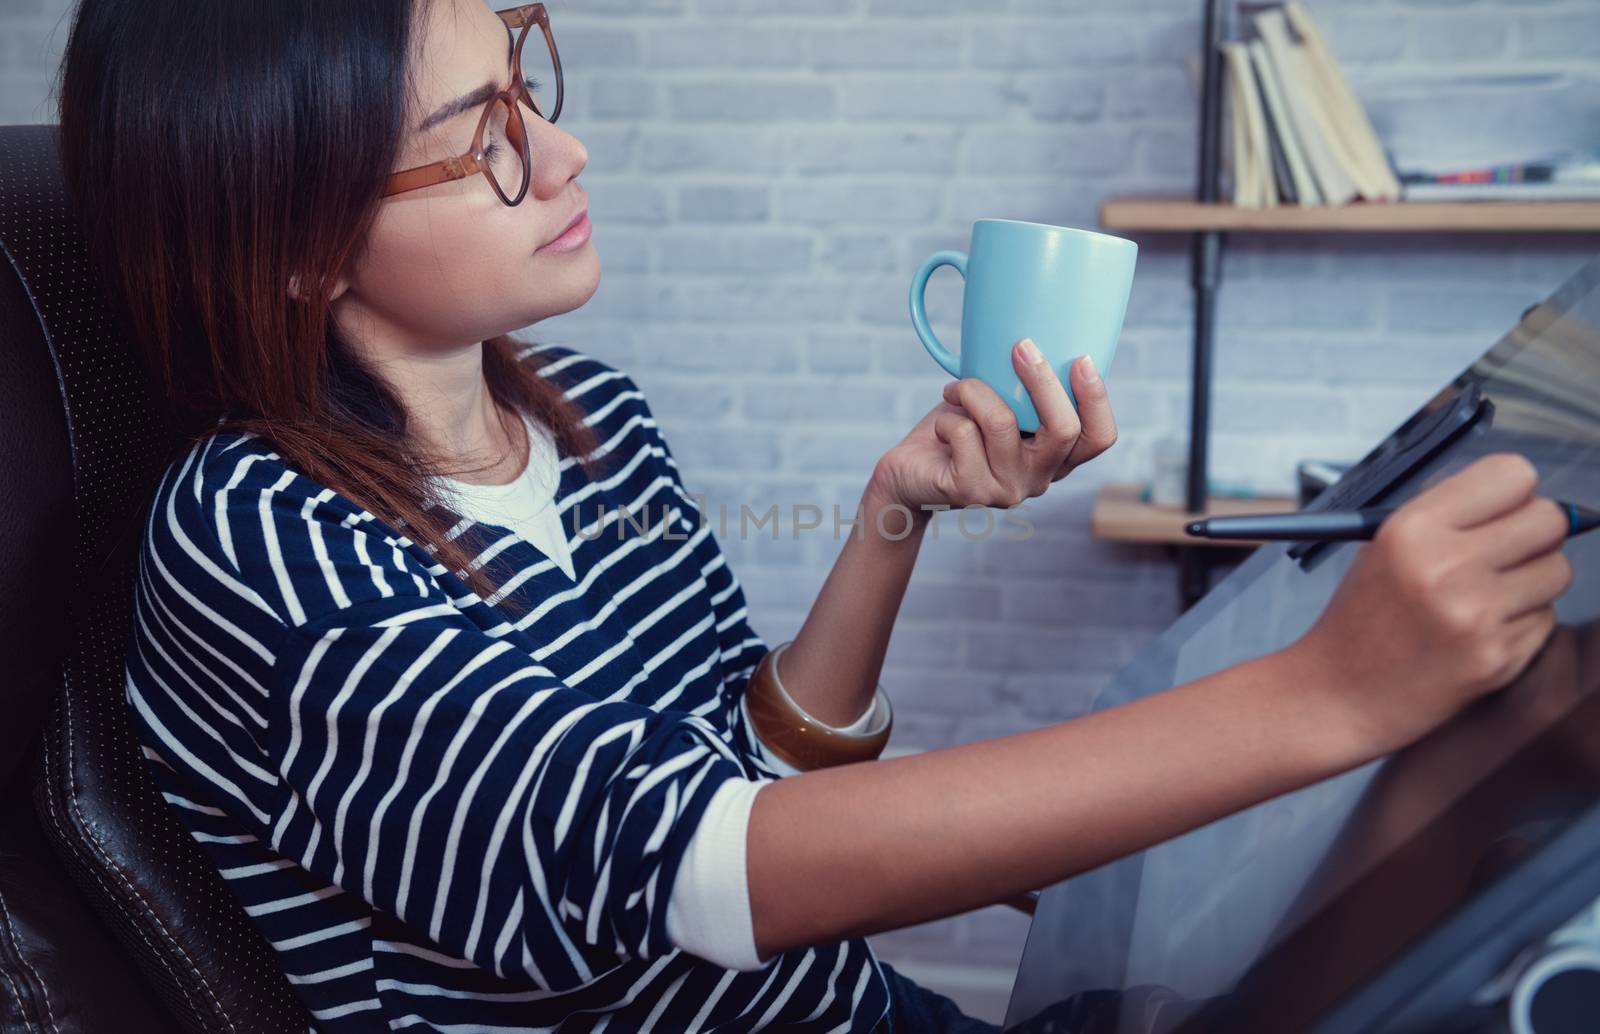 Asian woman looking down on a cup of coffee to sketch, focus on face